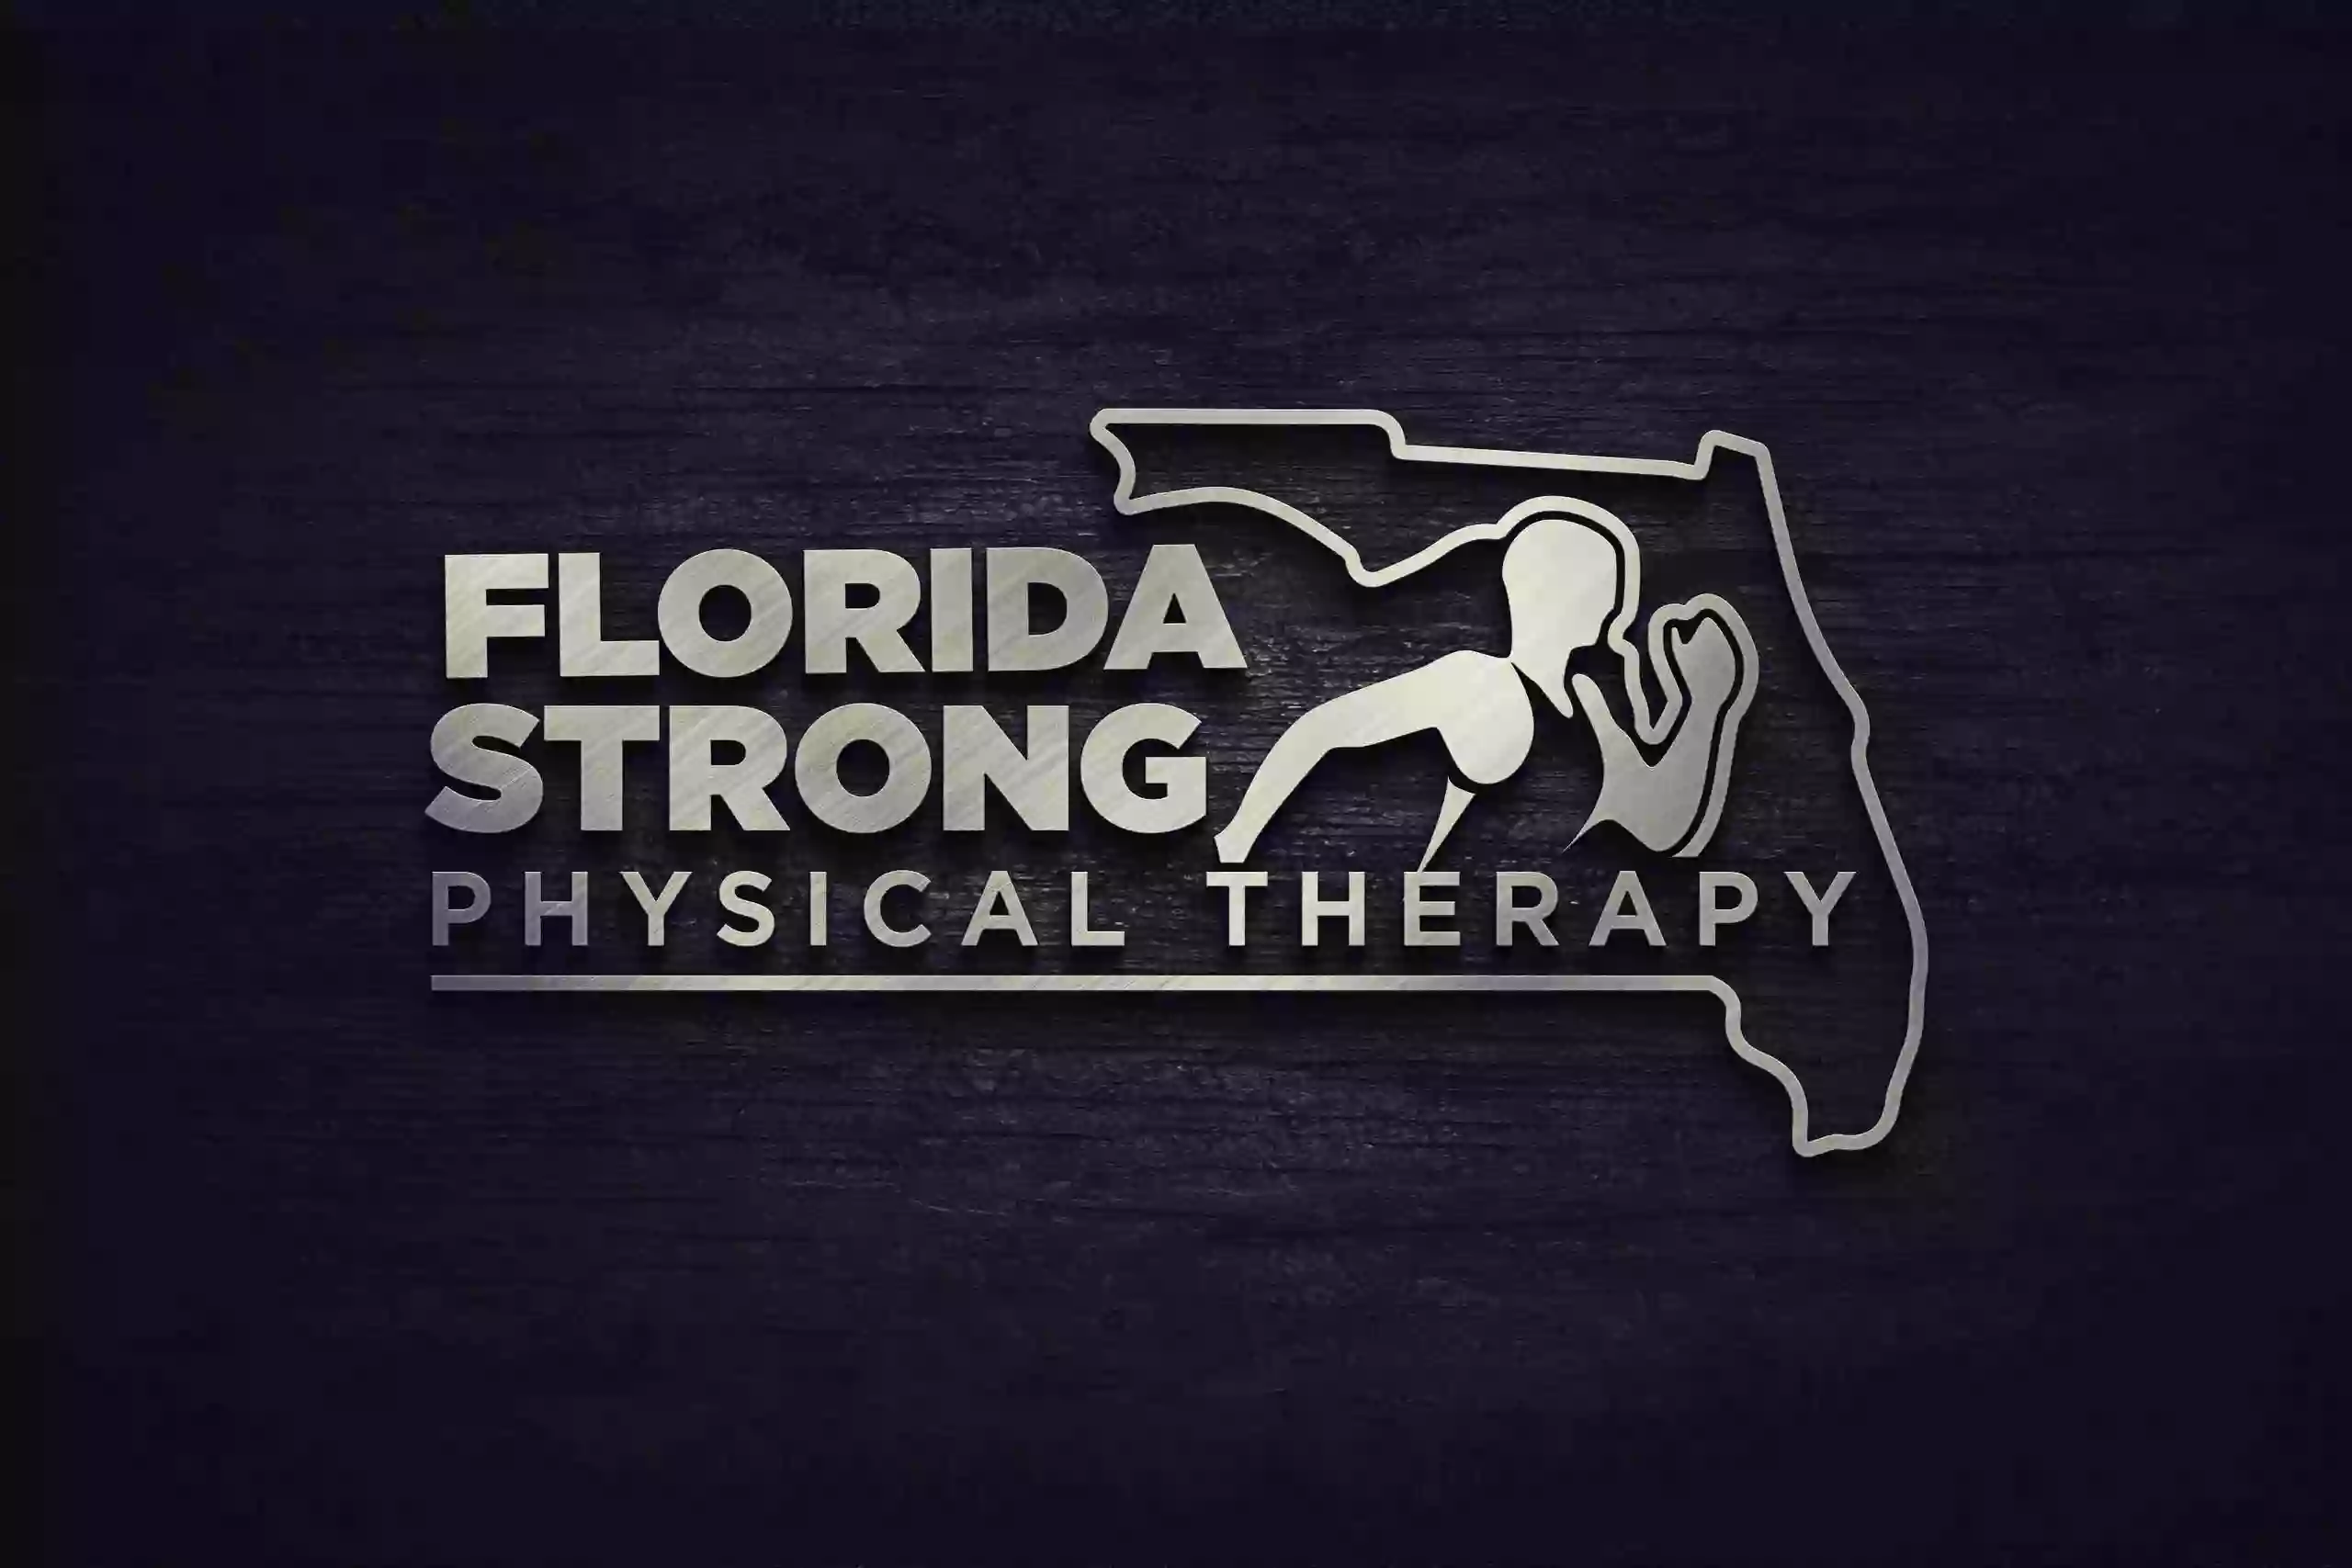 Florida Strong Physical Therapy